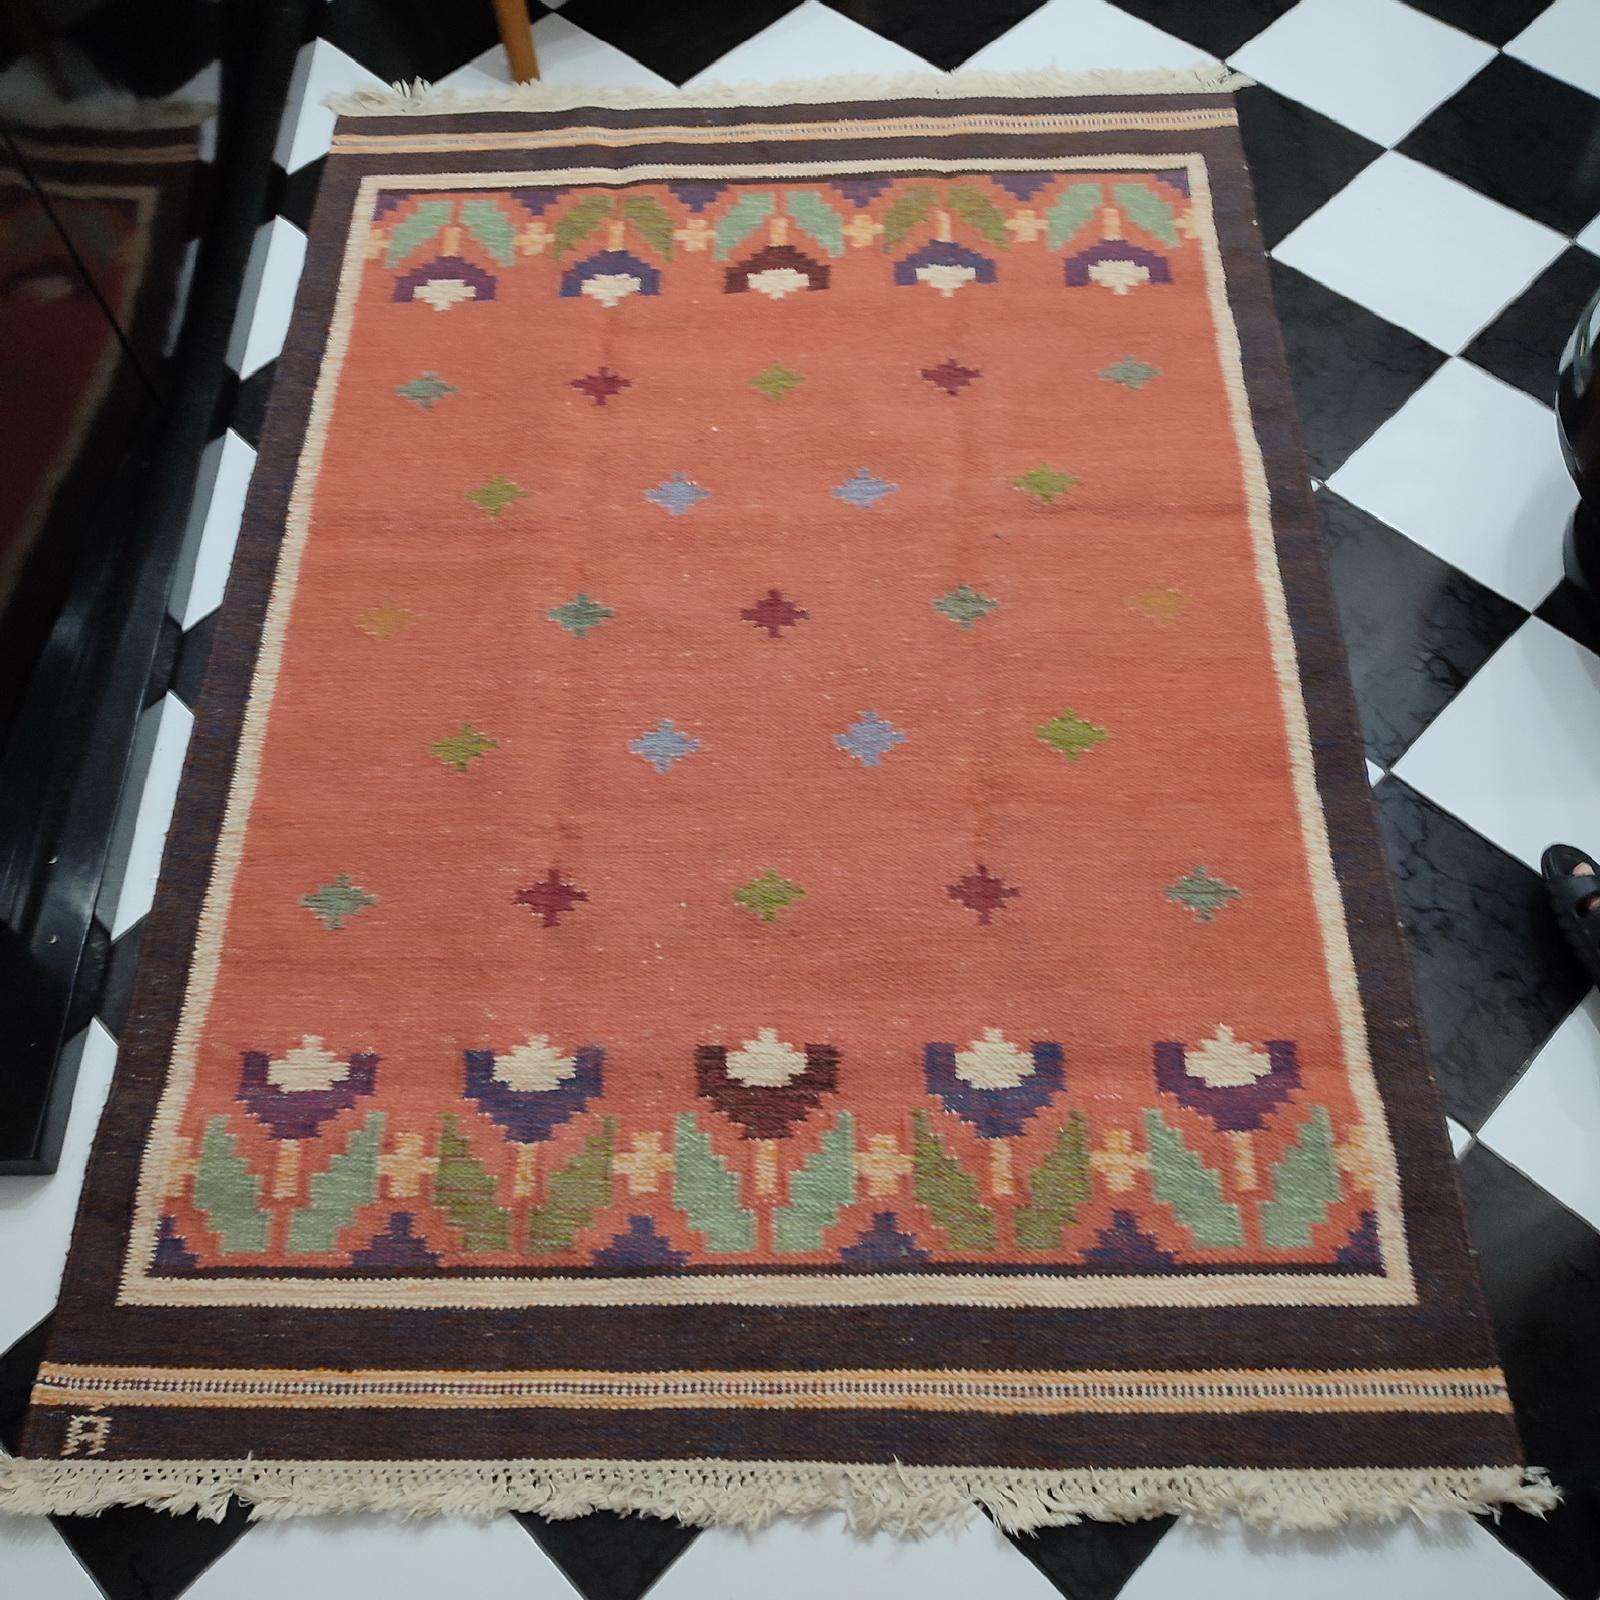 Hand-Woven Vintage Swedish Flat-Weave Rug Signed by Anna Johanna Angstrom